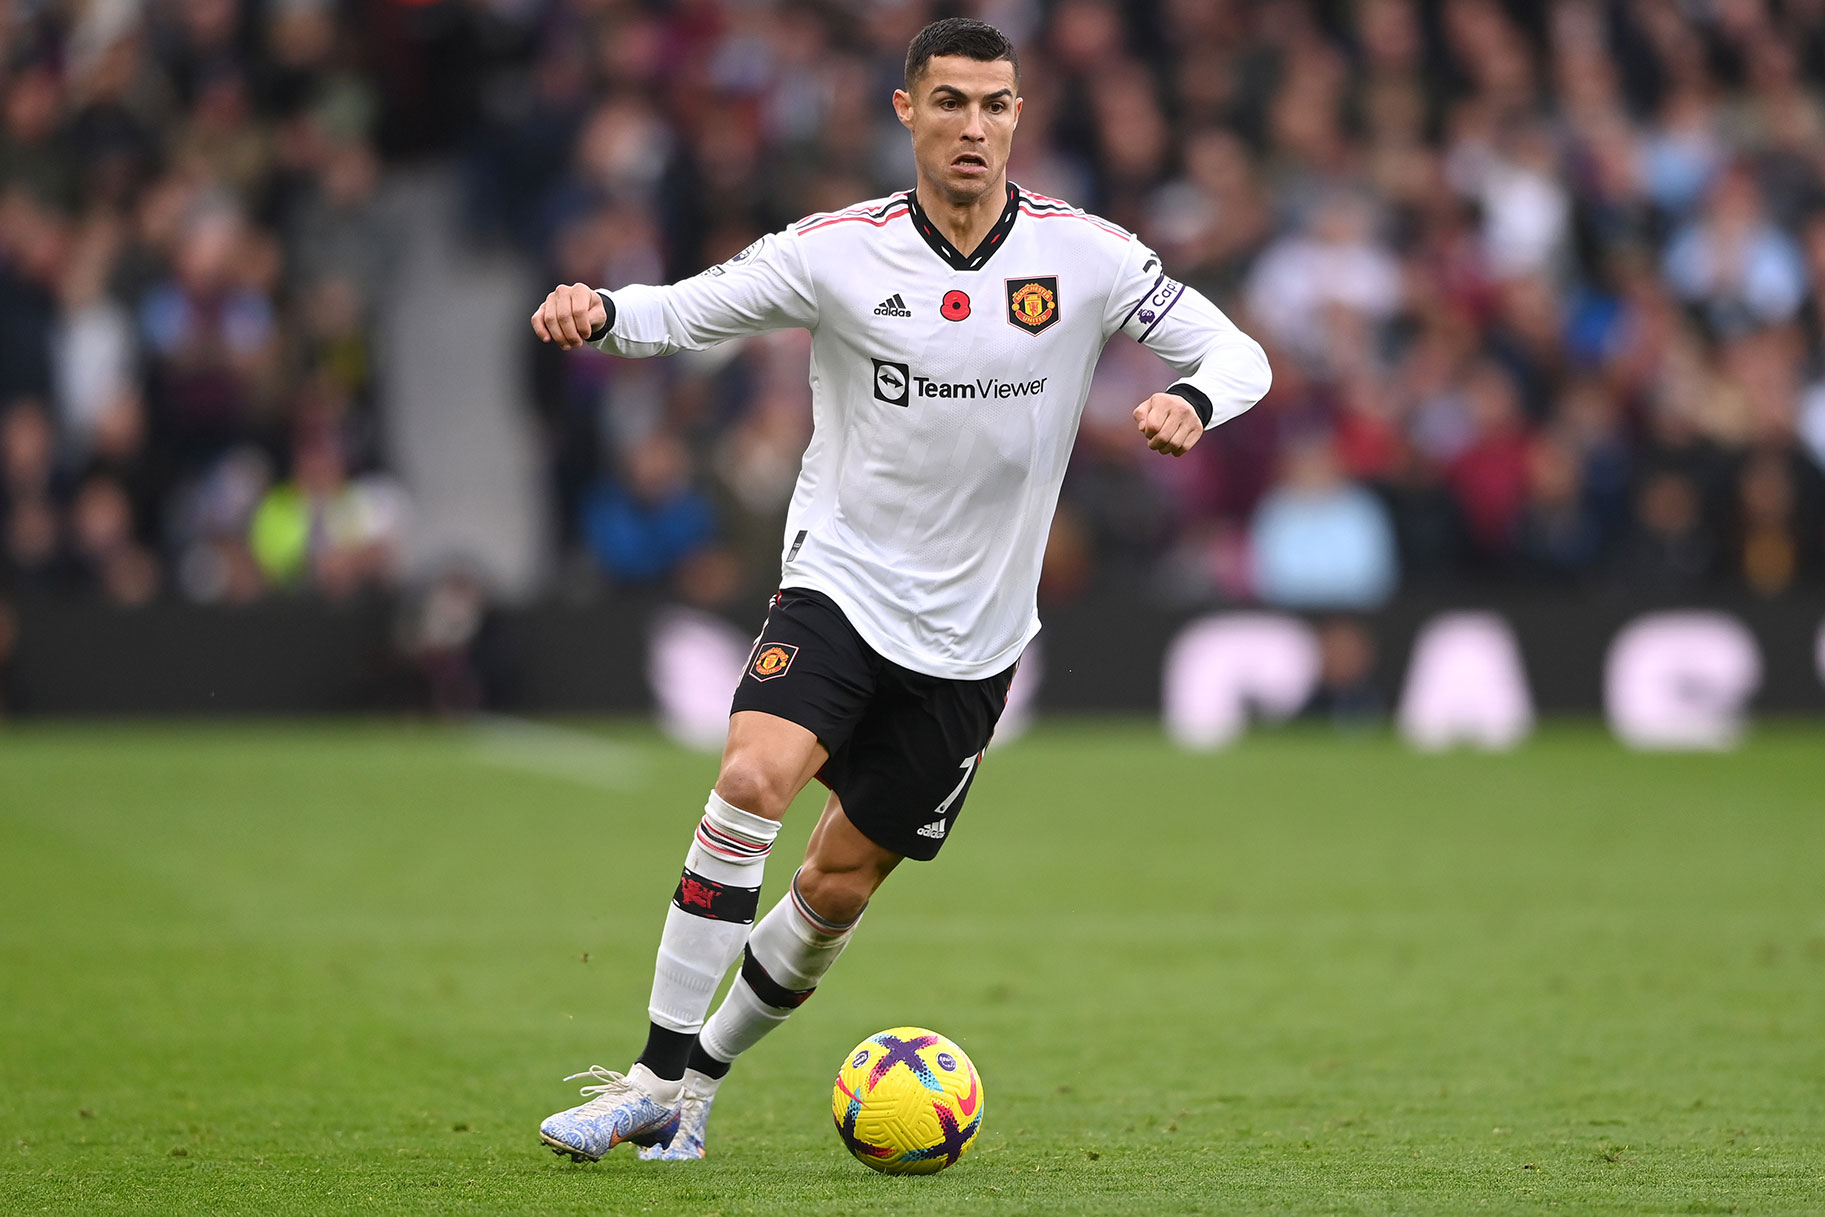 Cristiano Ronaldo of Manchester United in action during the Premier League match between Aston Villa and Manchester United